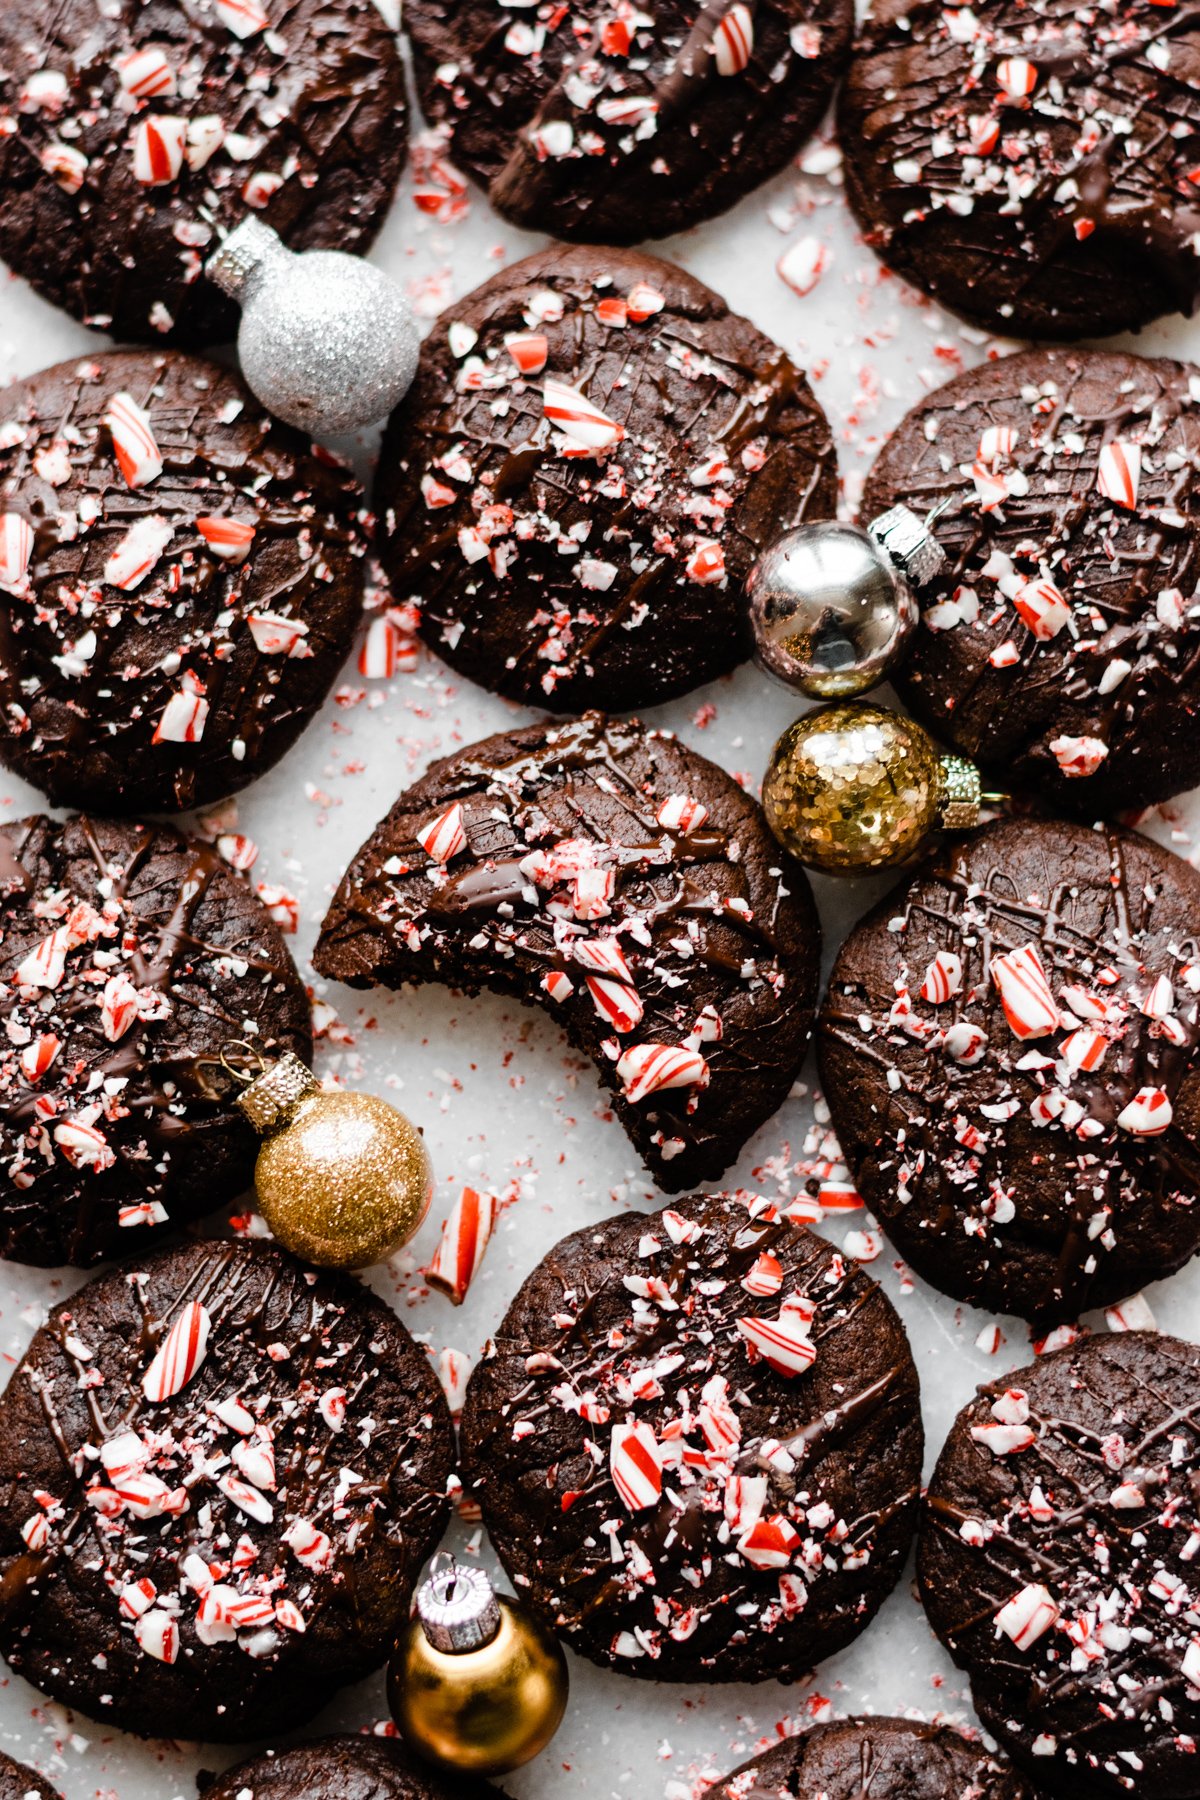 Peppermint mocha cookies drizzled with chocolate and sprinkled with crushed peppermint on a marble surface.